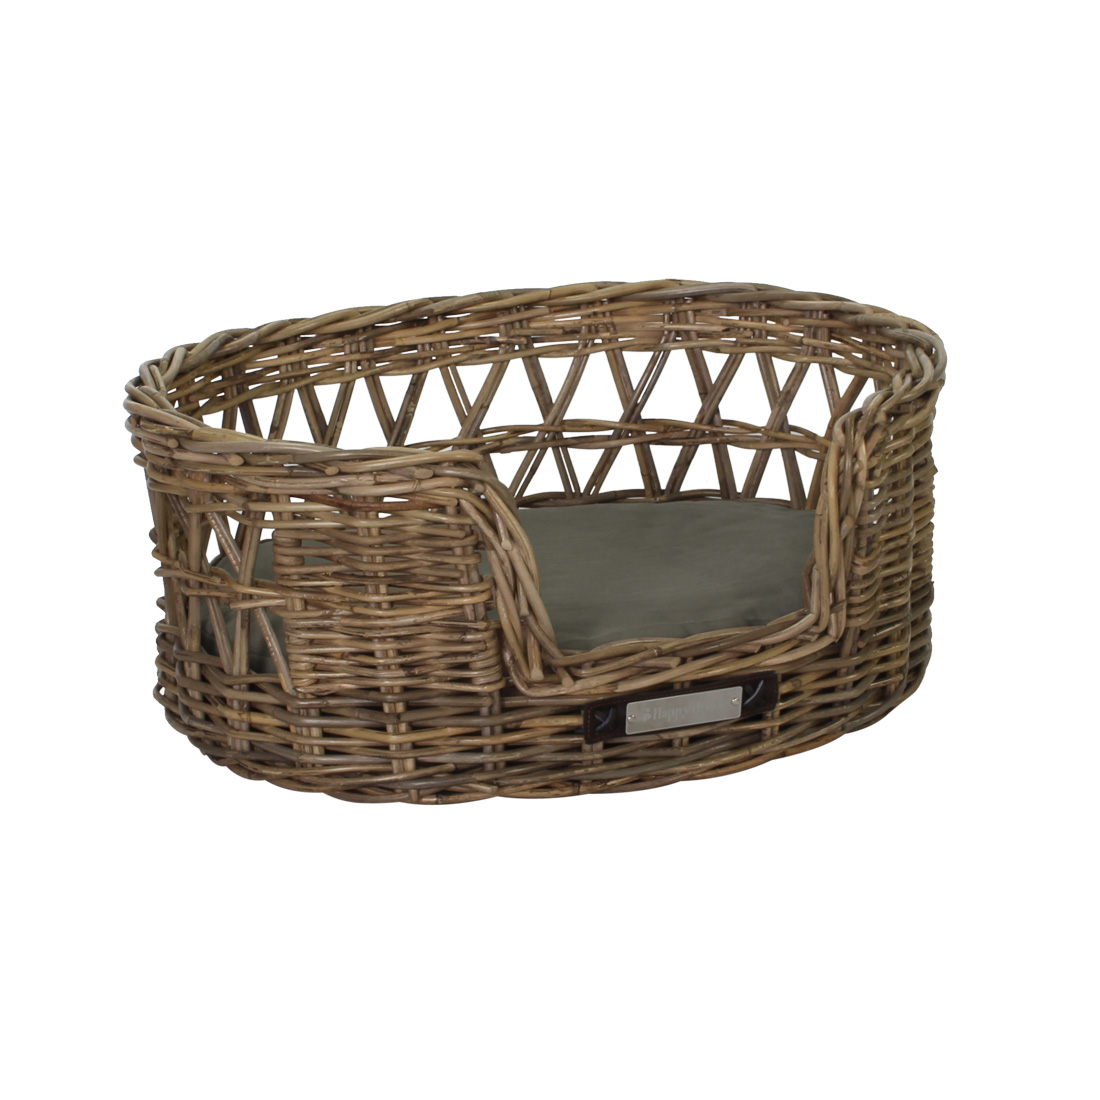 classical dogbasket deluxe open braided rattan m oval luxury outdoor pillow